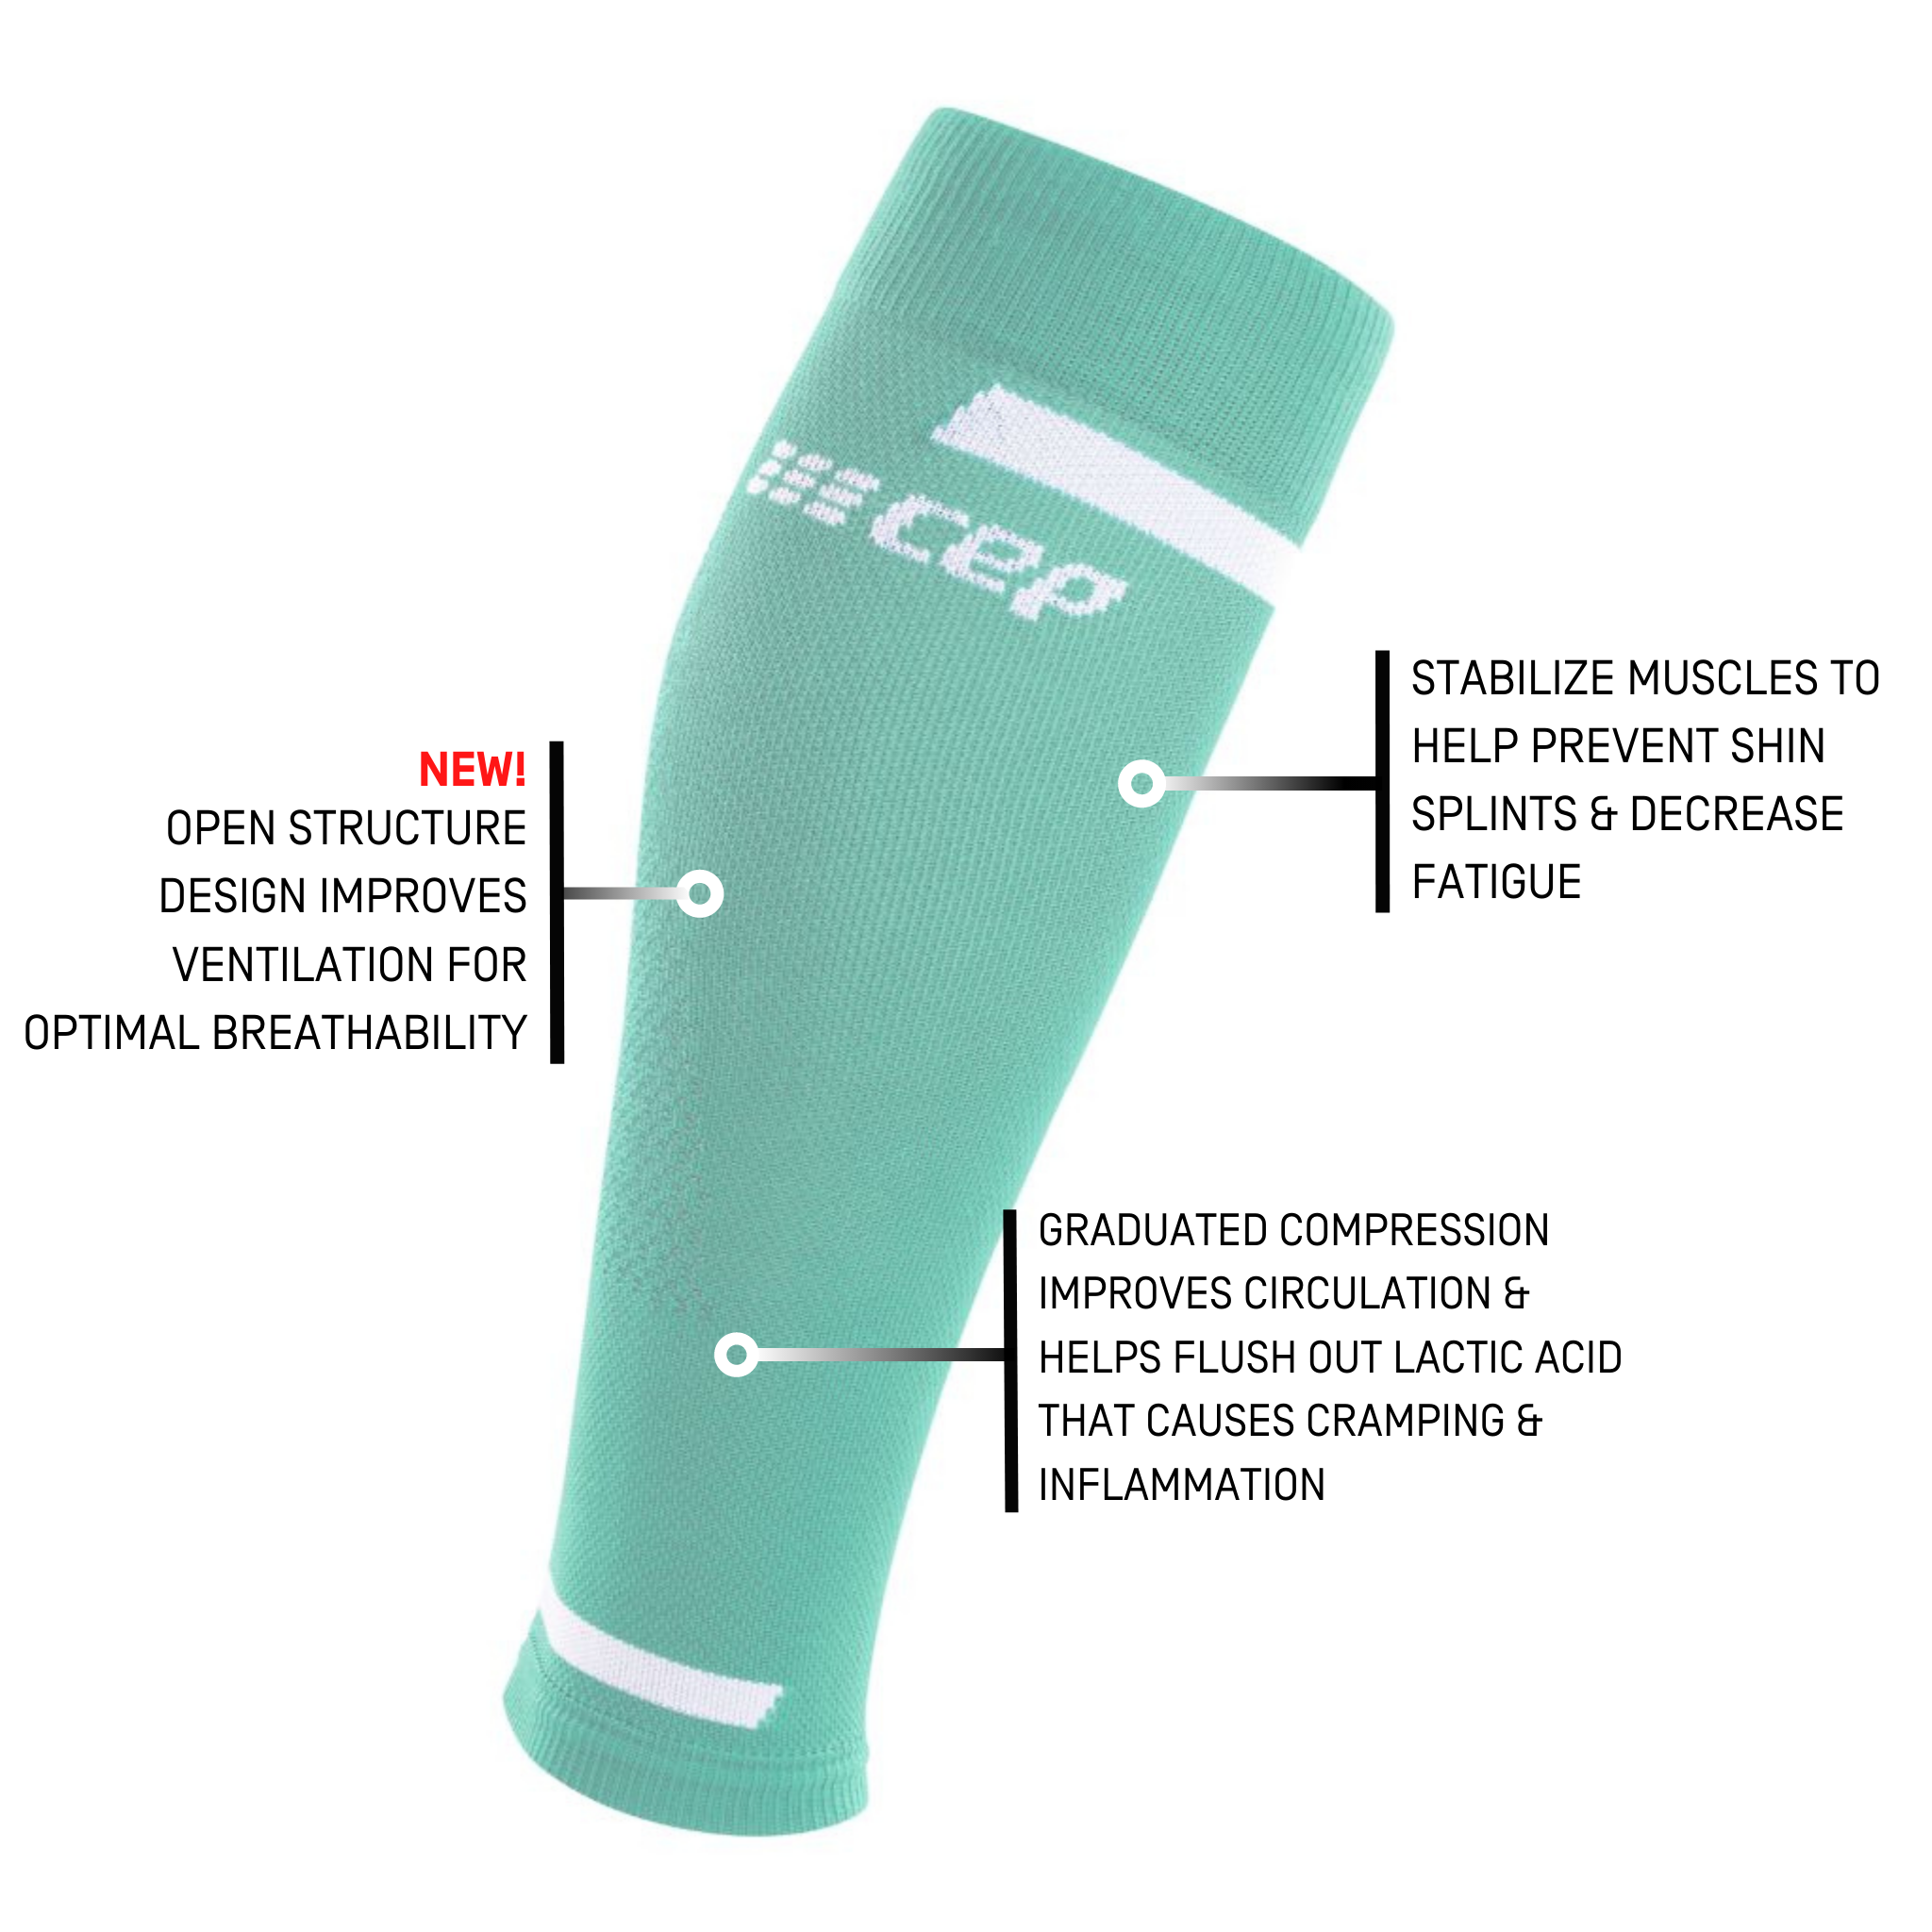 CEP The Run Compression 4.0 Calf Sleeves - Men's 